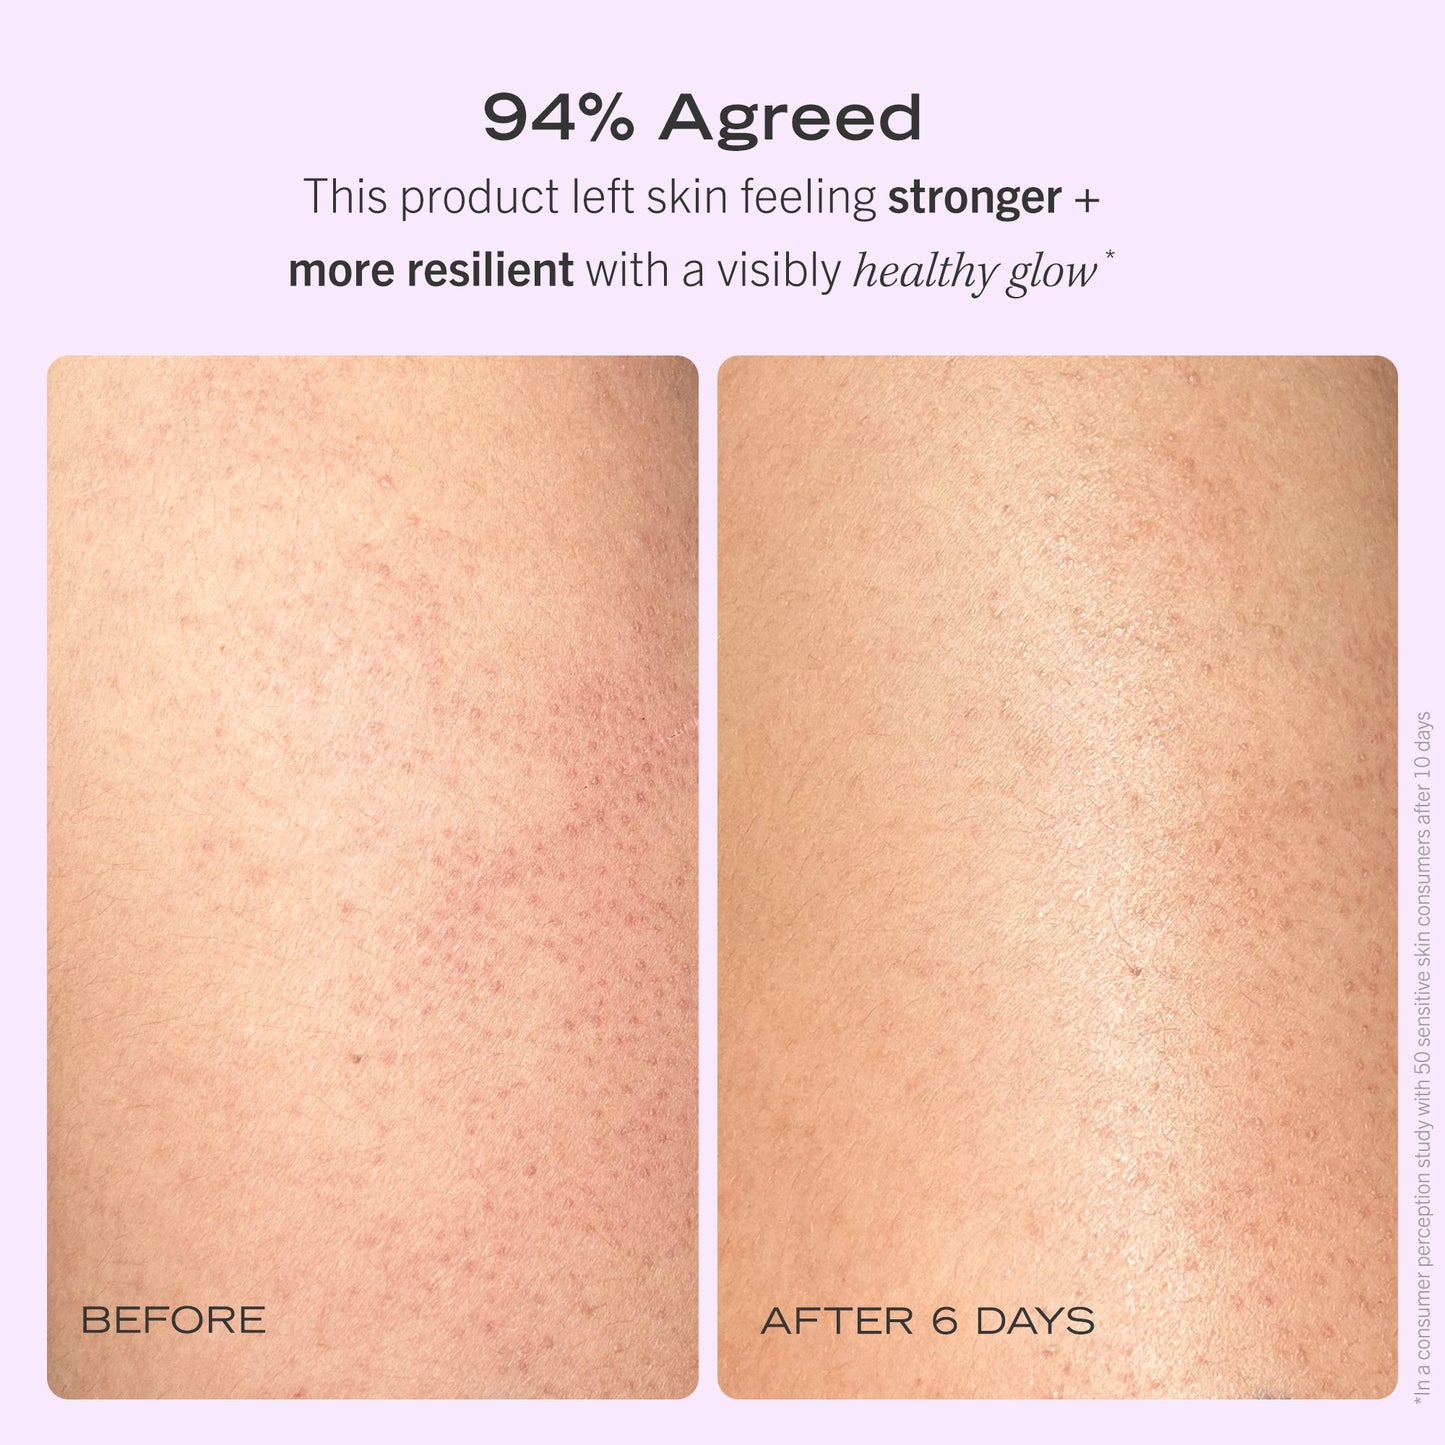 Skin Before and After 6 days of using Nourishing Body Oil.  94% Agreed that the Nourishing Body Oil left skin feeling stronger + more resilient with a visibly healthy glow.